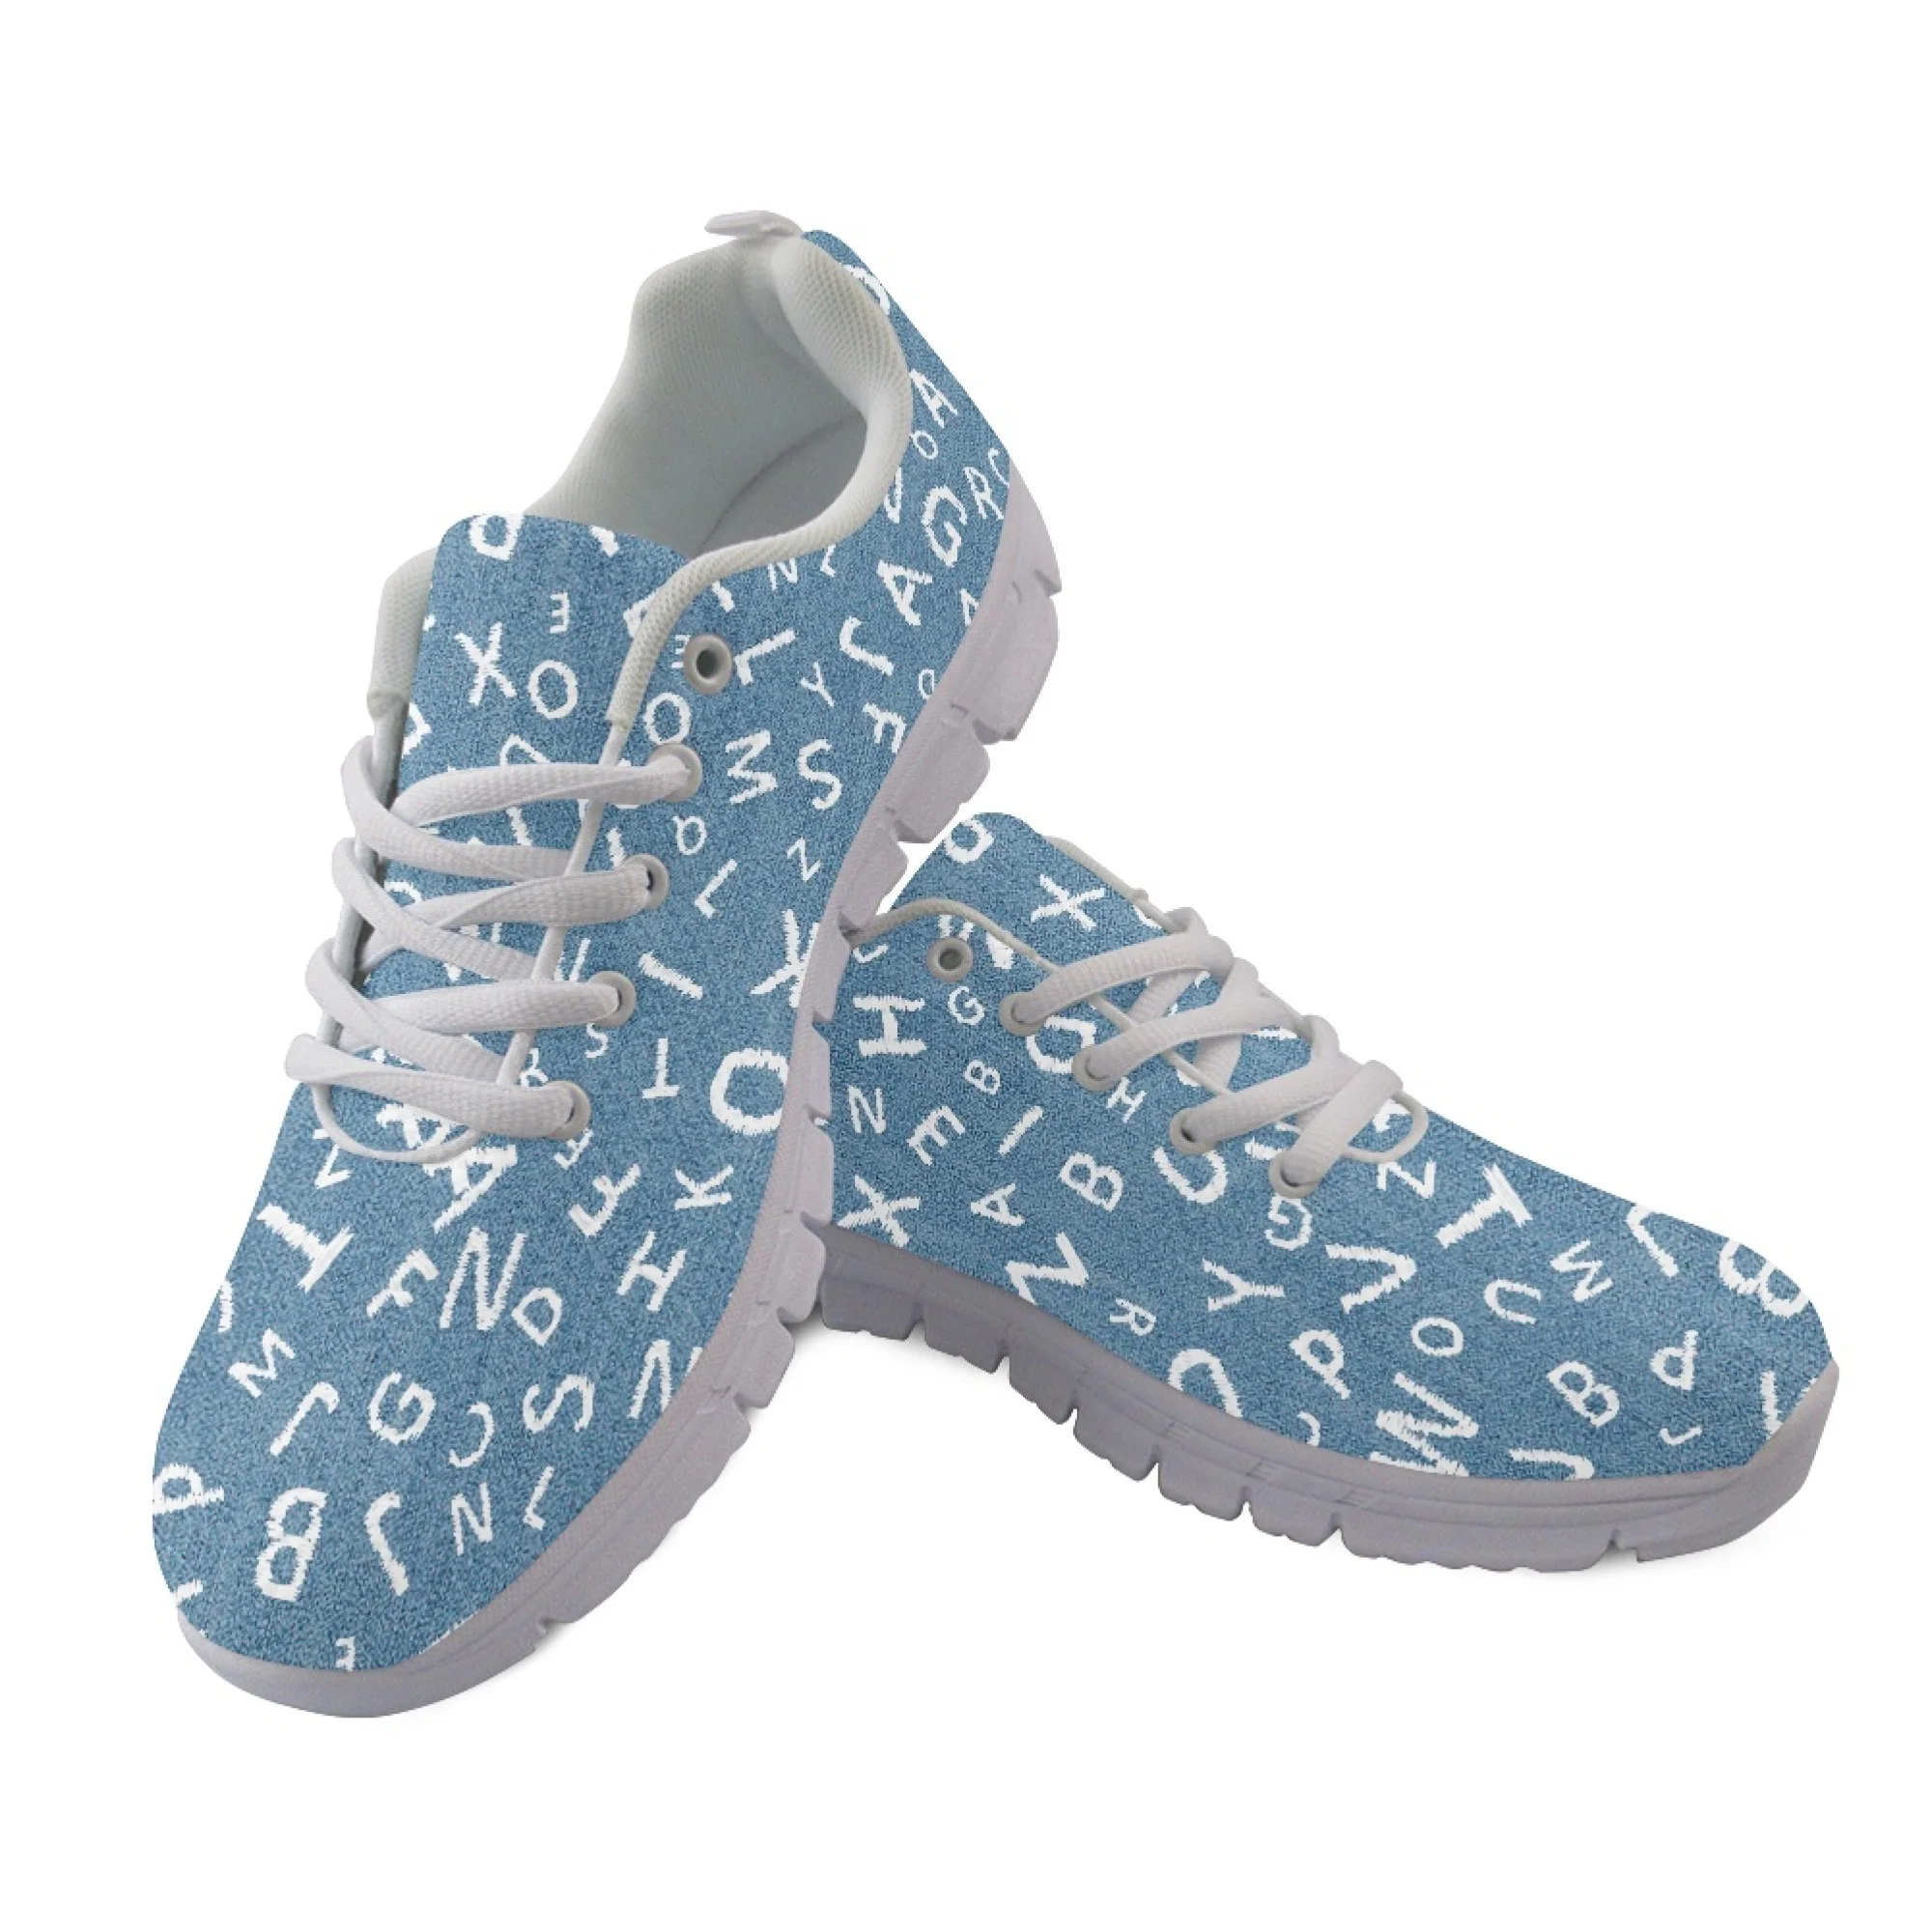 

Yikeluo English Alphabet Print New Fashion Women's Shoes Casual Sneakers Autumn Female Lace-up Mesh Walking Footwear for Girls